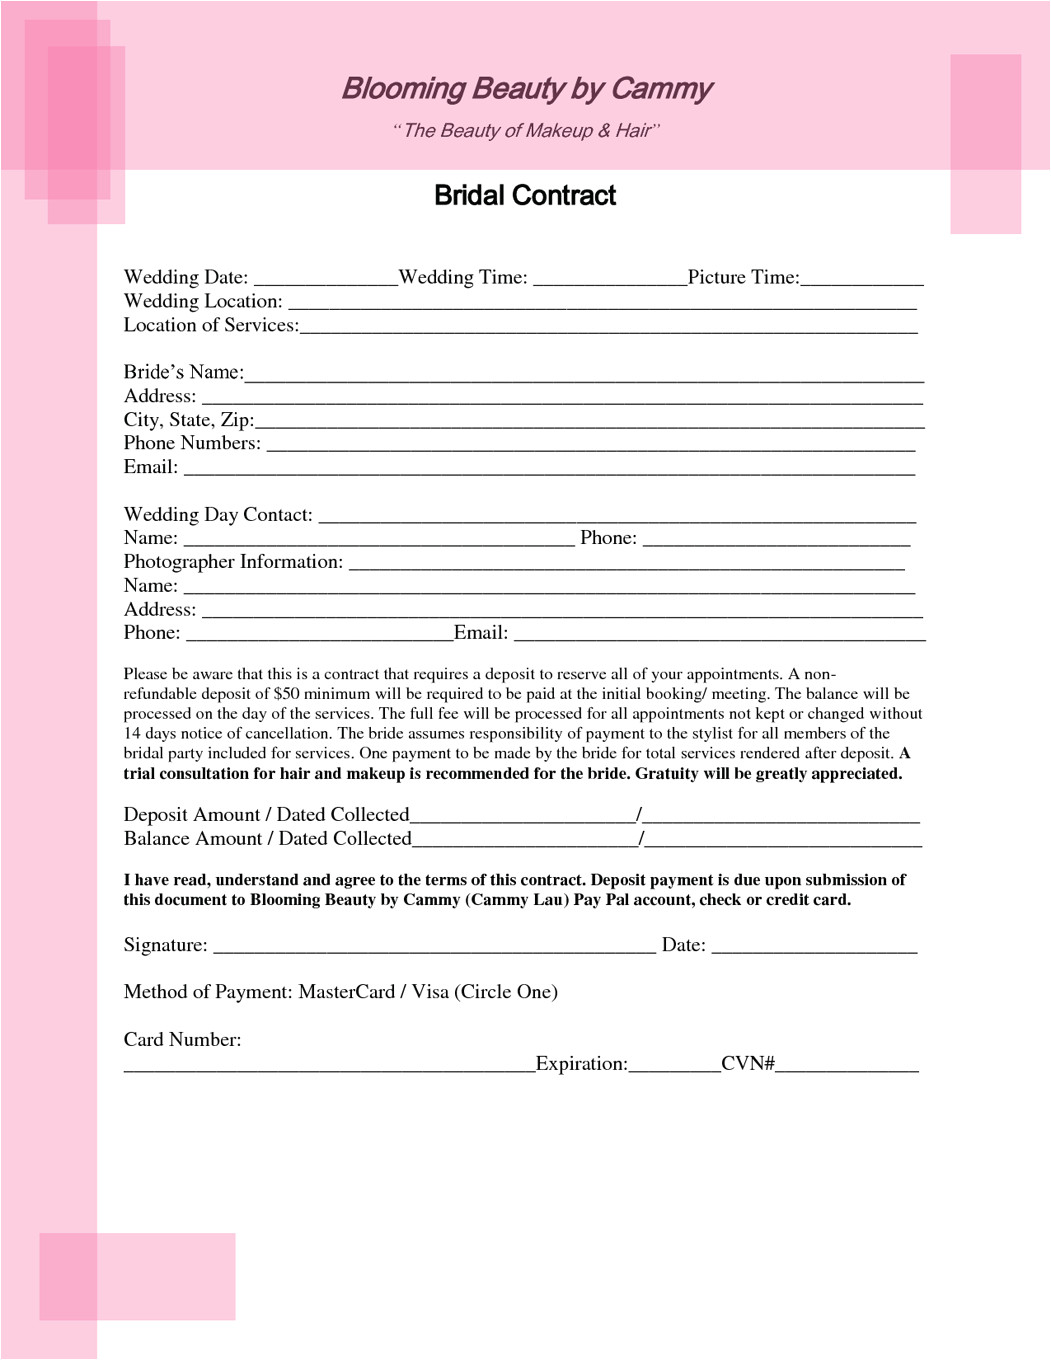 15 images of wedding hair contracts template in word download 3549